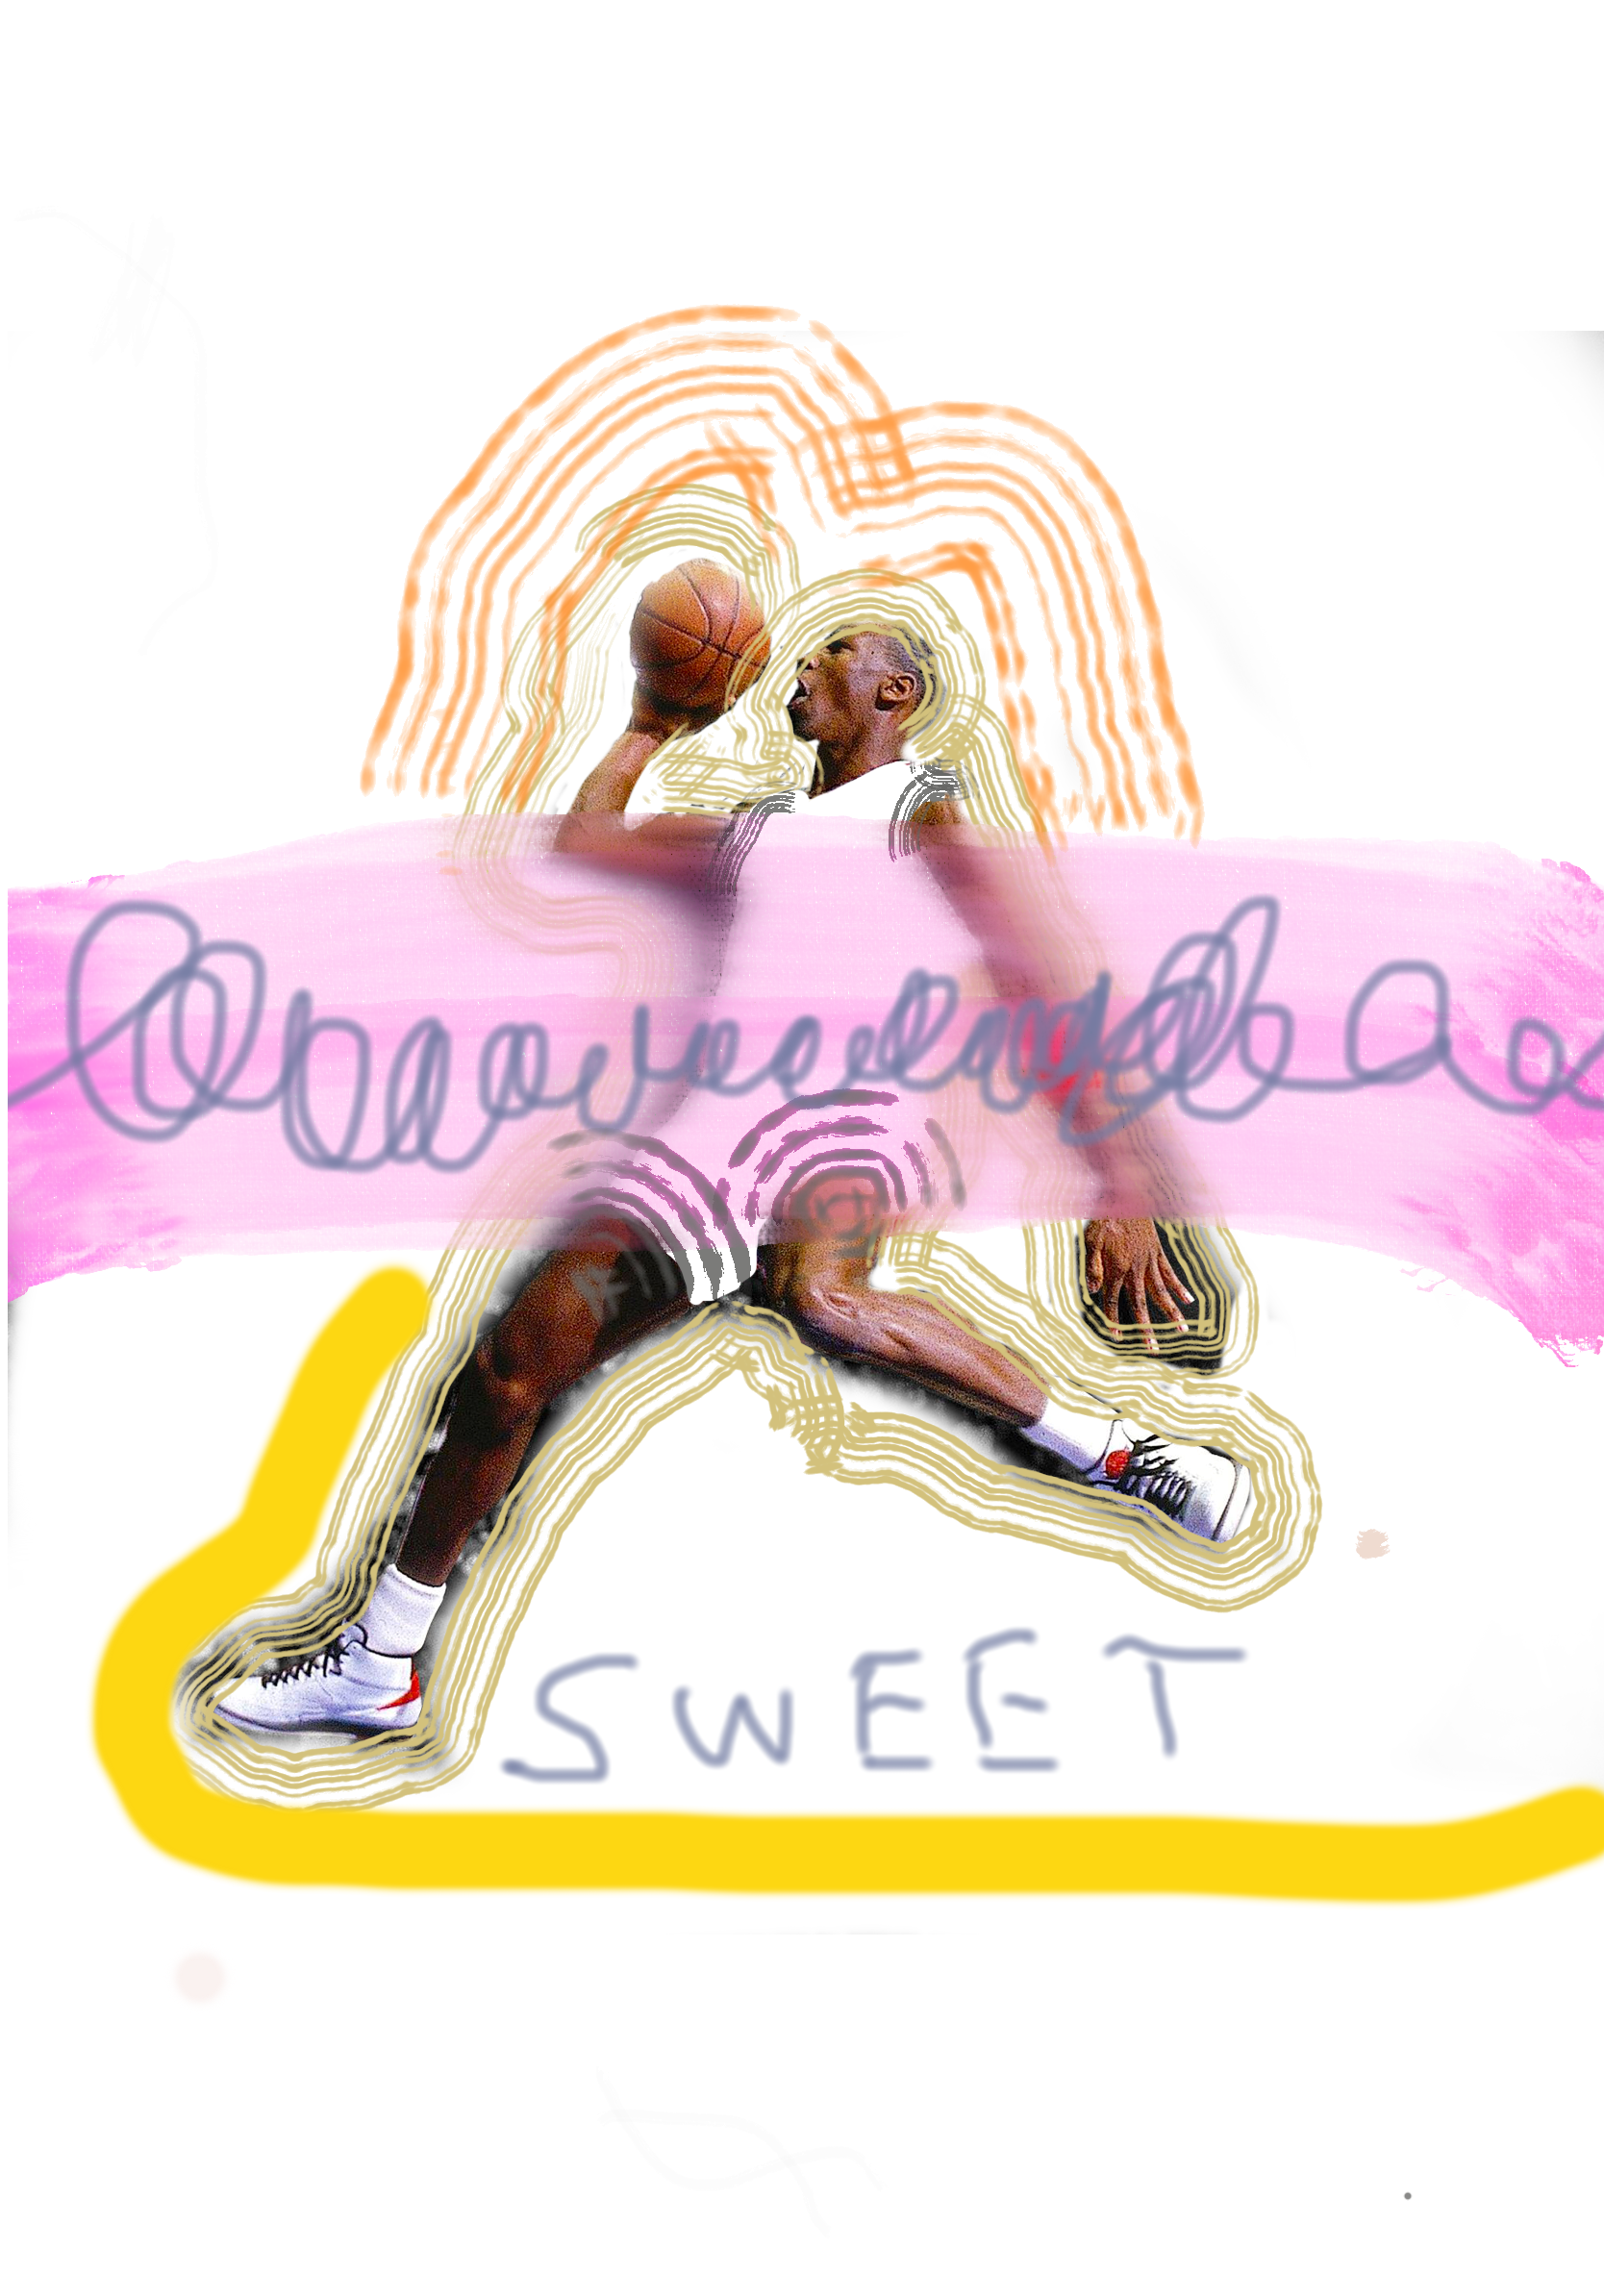 Placeholder ImageSweet (Print)